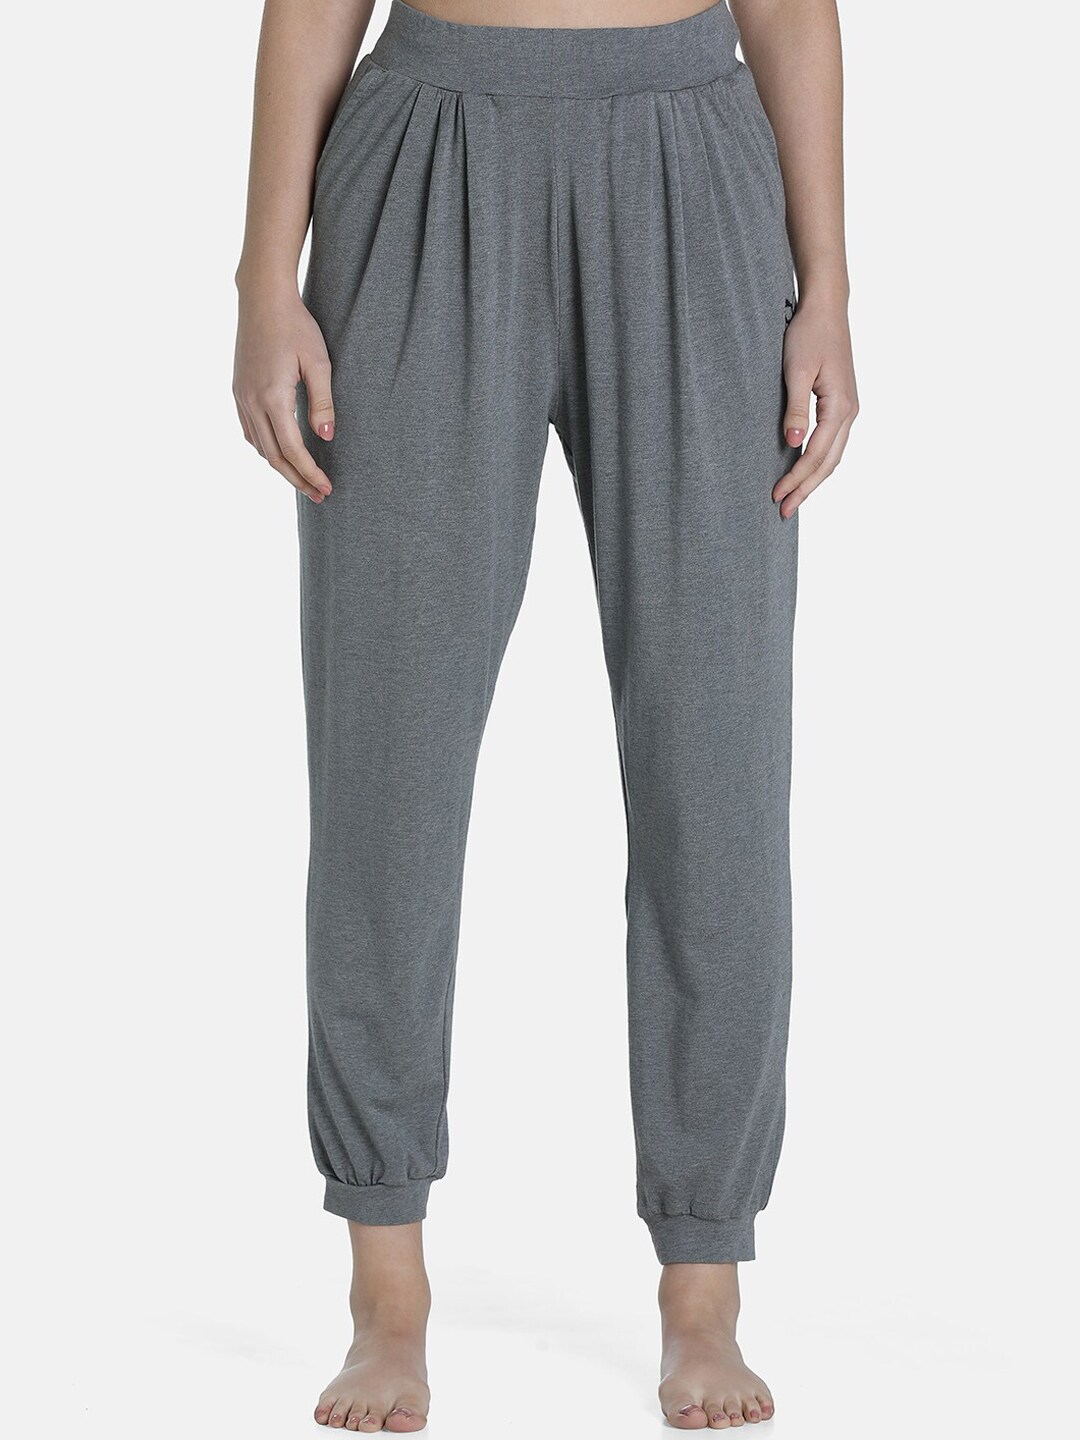 Puma Women Grey Solid Cotton Joggers Price in India